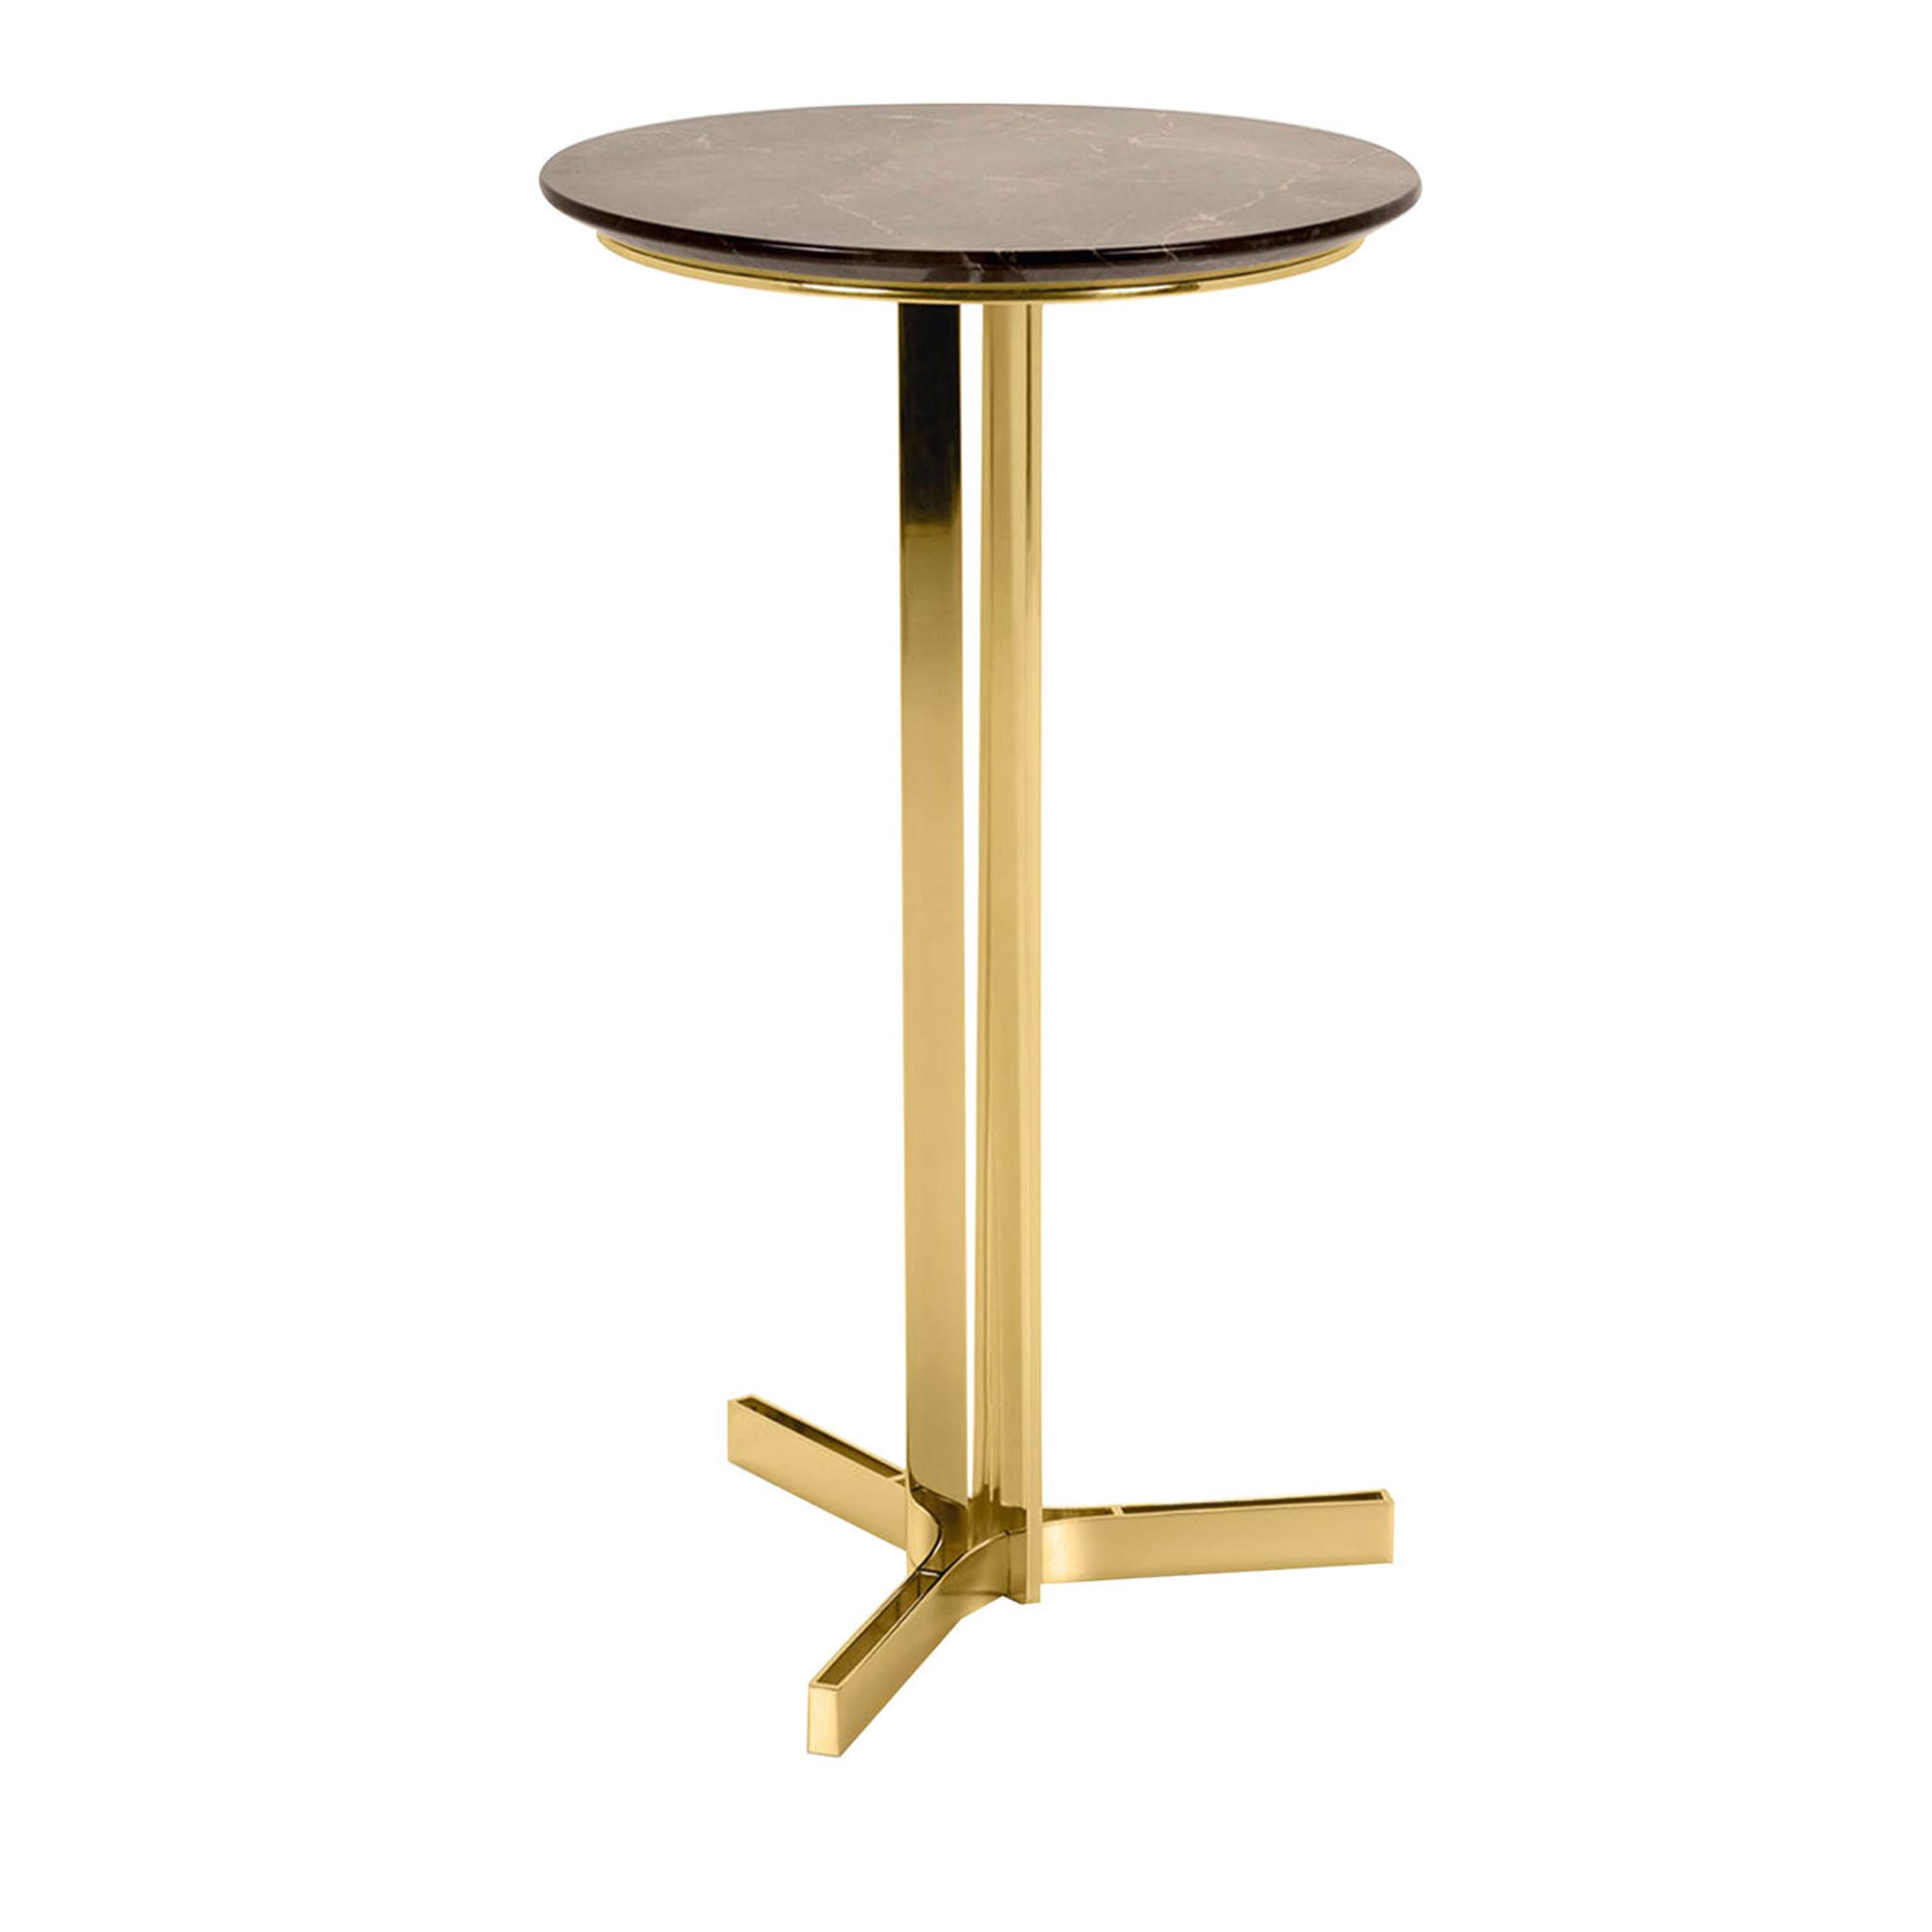 Ceo Cocktail Table with Moresco Imperiale Marble Top - Main view